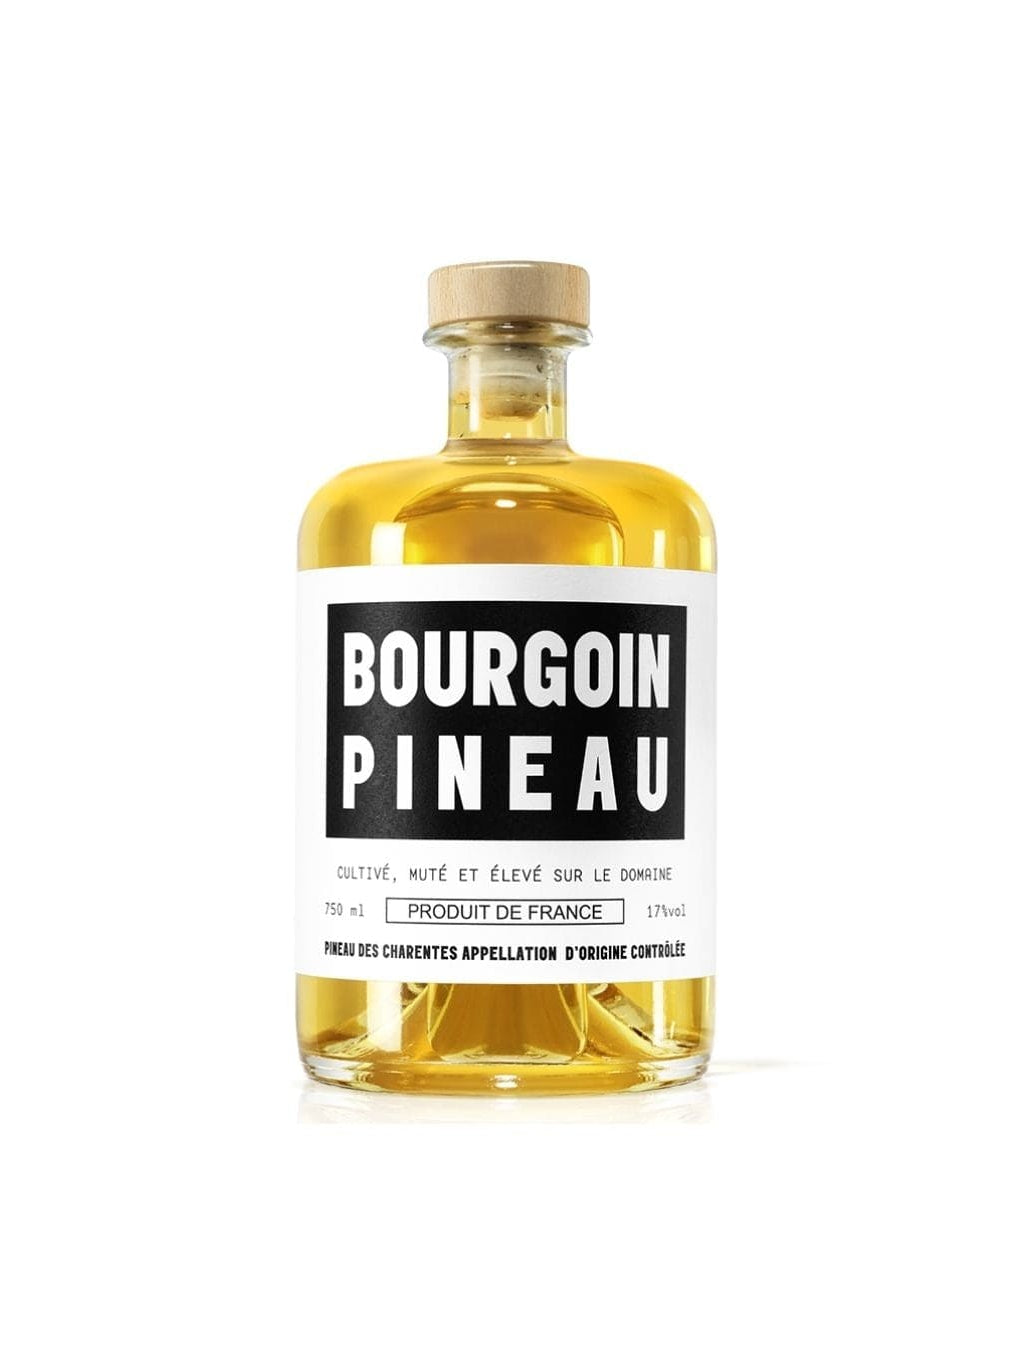 Shop Cognac Bourgoin Cognac Bourgoin | Pineau Bourgoin online at PENTICTON artisanal French wine store in Hong Kong. Discover other French wines, promotions, workshops and featured offers at pentictonpacific.com 